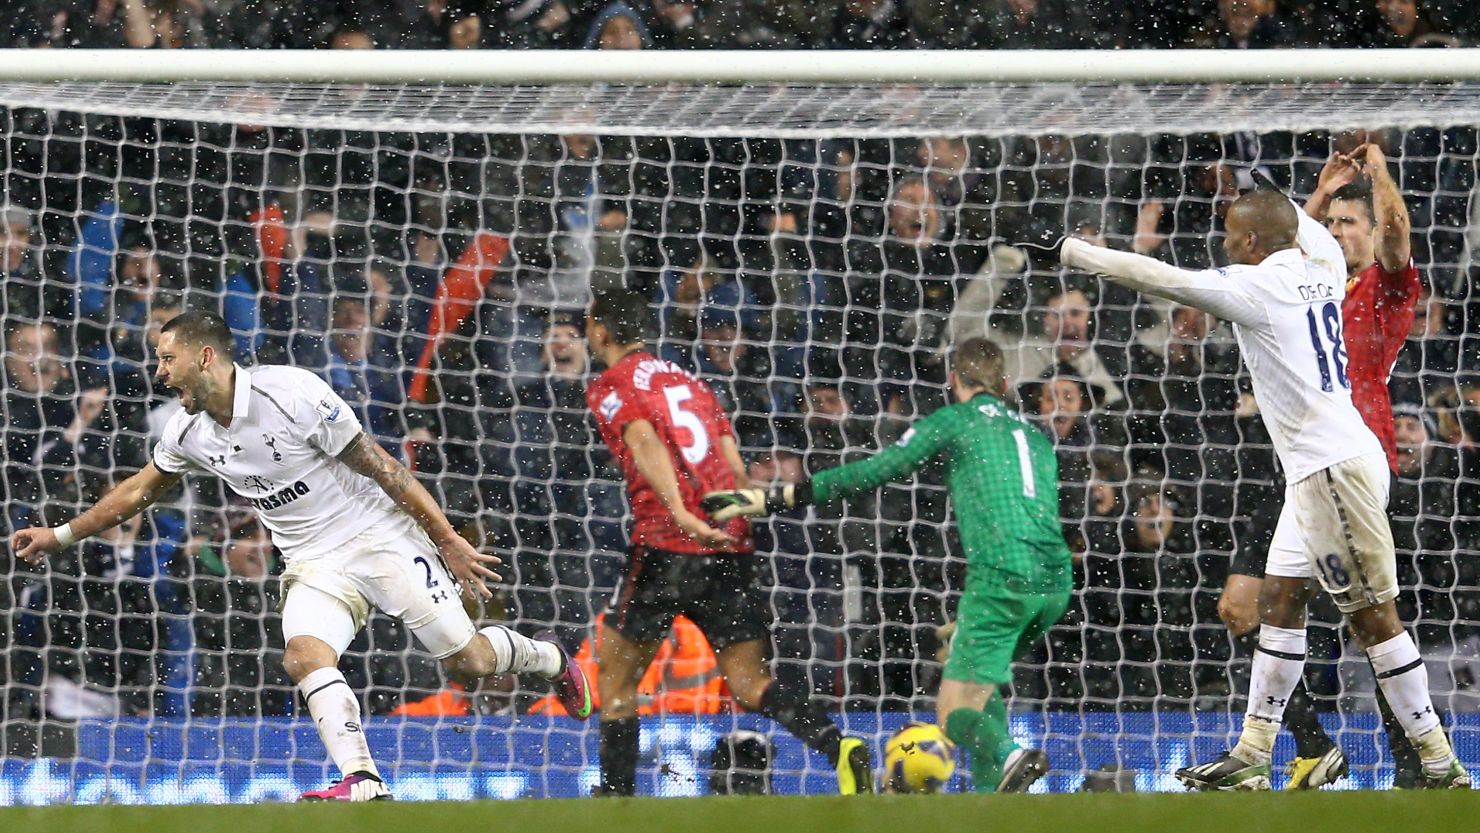 Clint Dempsey (far left) wheels away after grabbing an injury time equaliser for Tottenham against Manchester United